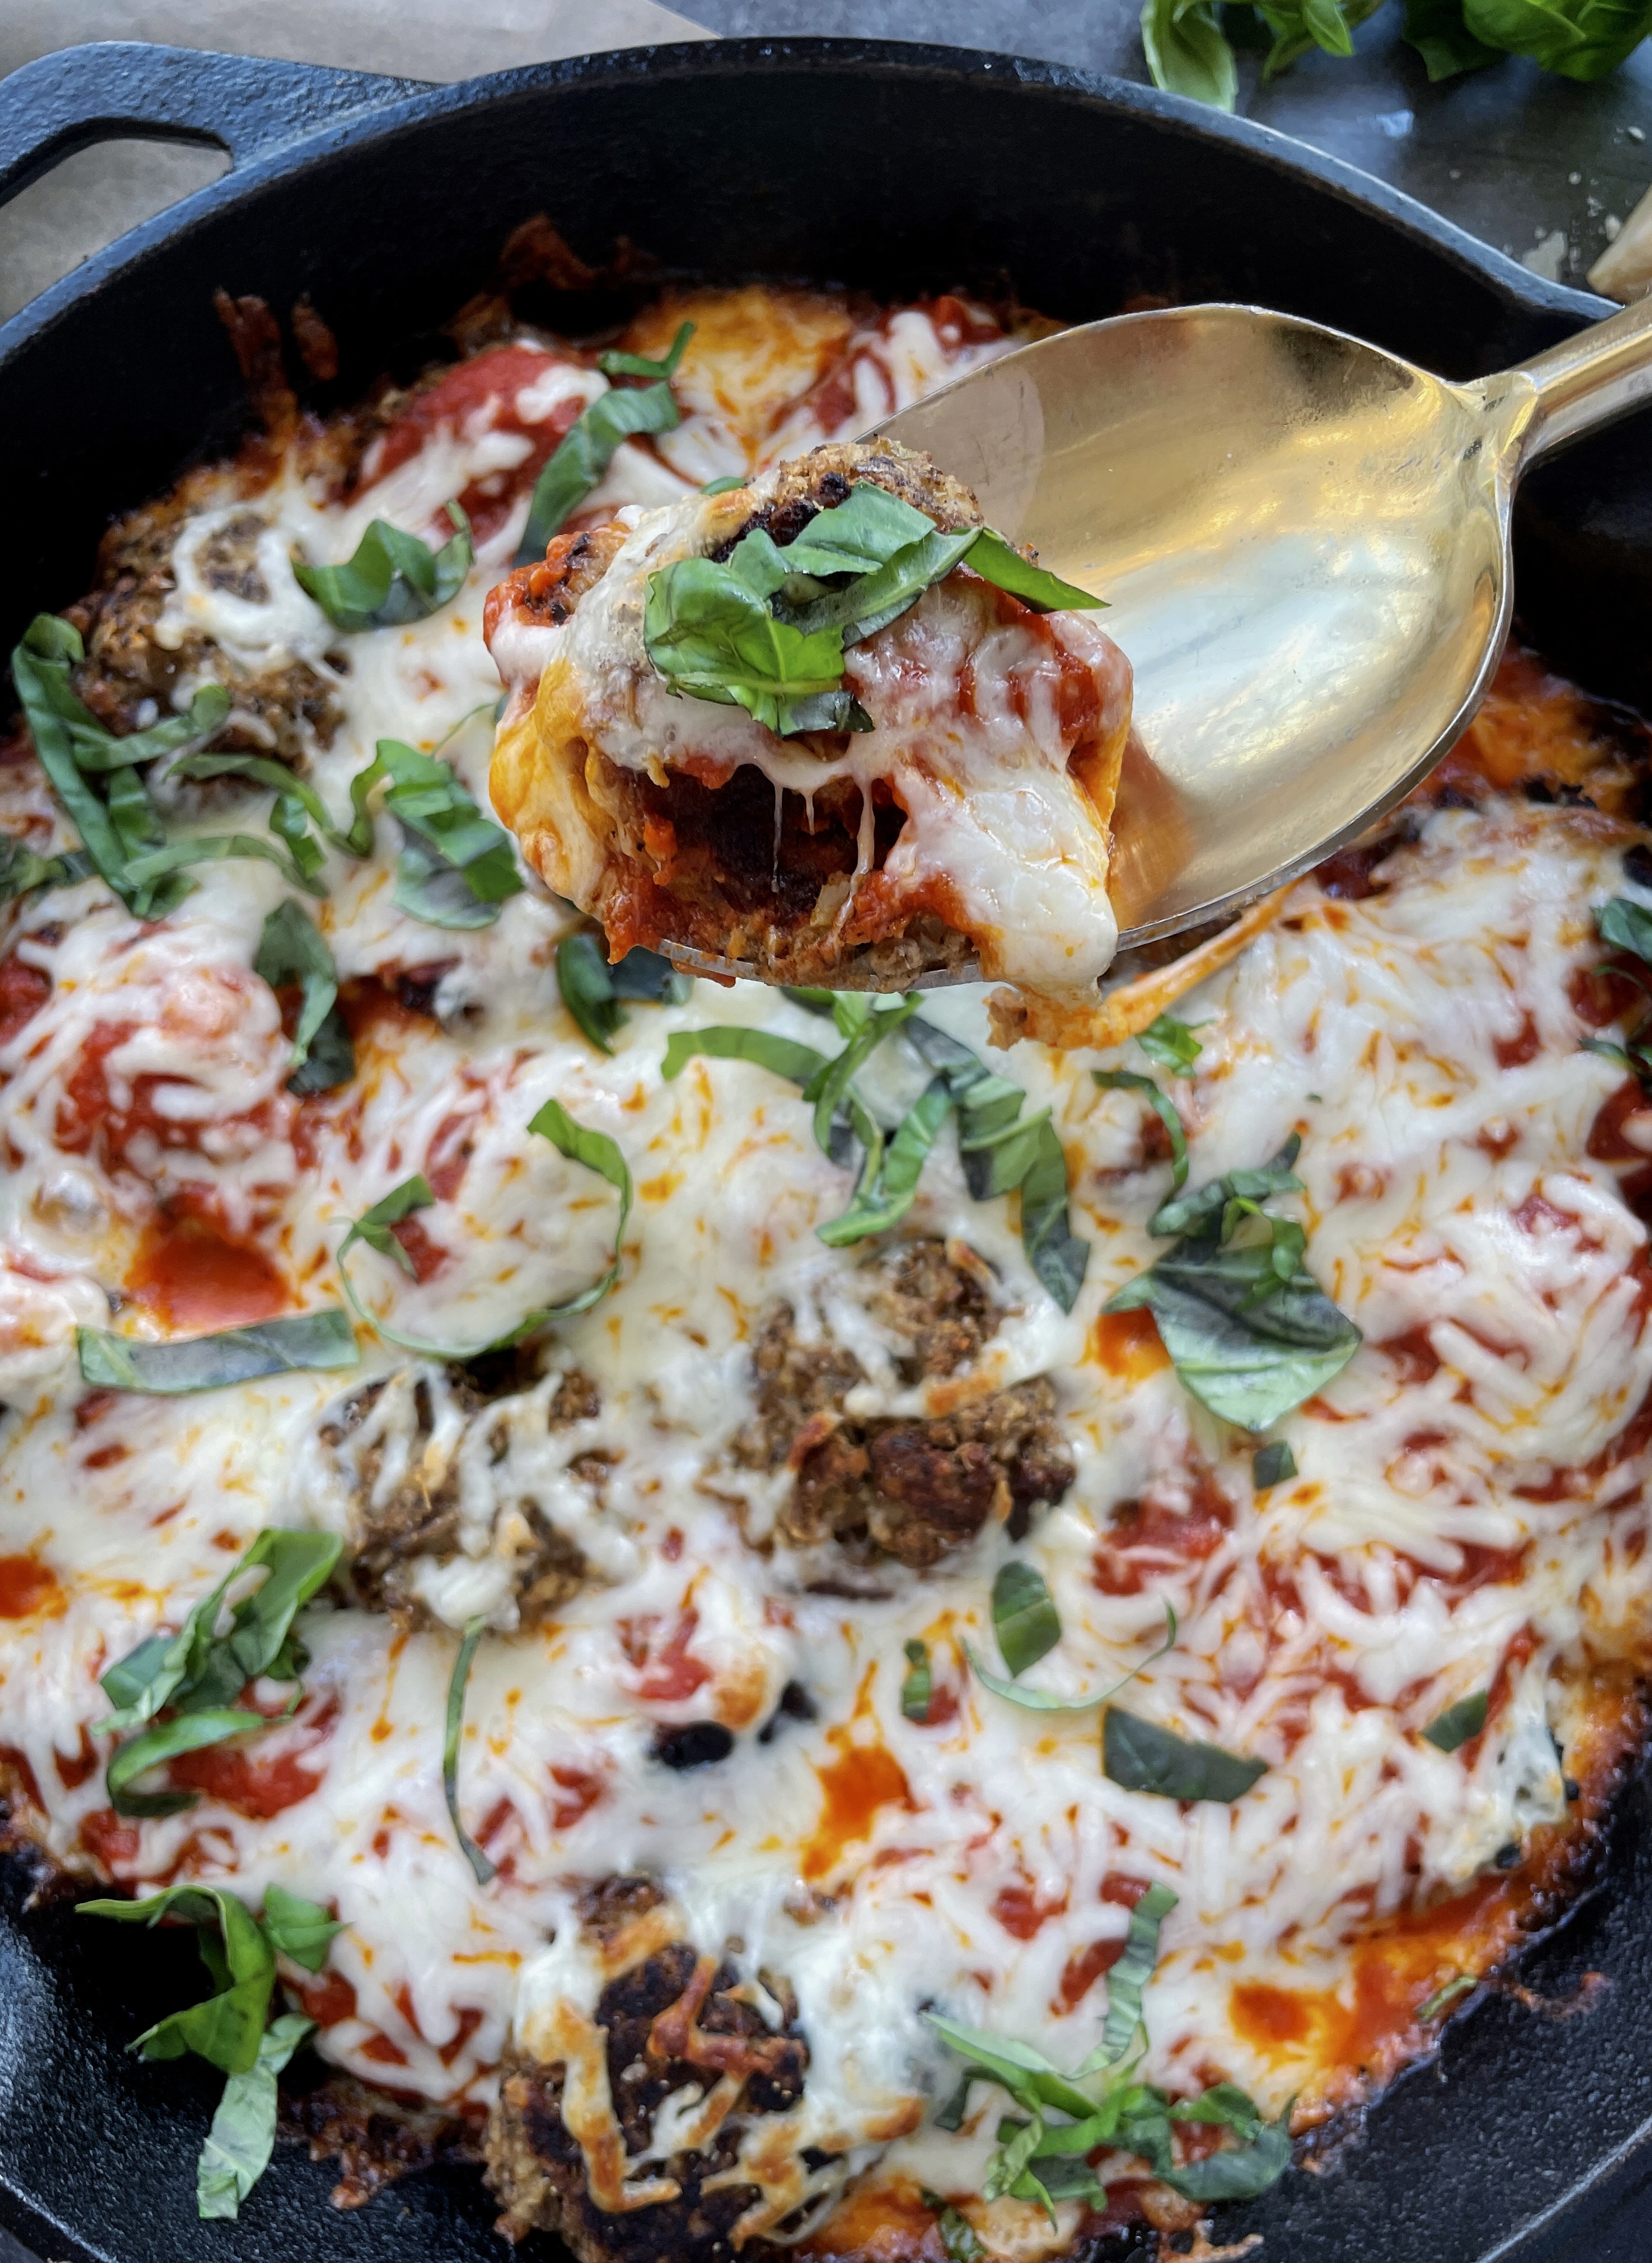 Lightly seared, veggie-filled, and protein-packed vegetarian meatballs baked off in marinara and all the cheese: this Cheesy Lentil Vegetarian "Meatball" Skillet is my favorite meatless weeknight dinner!